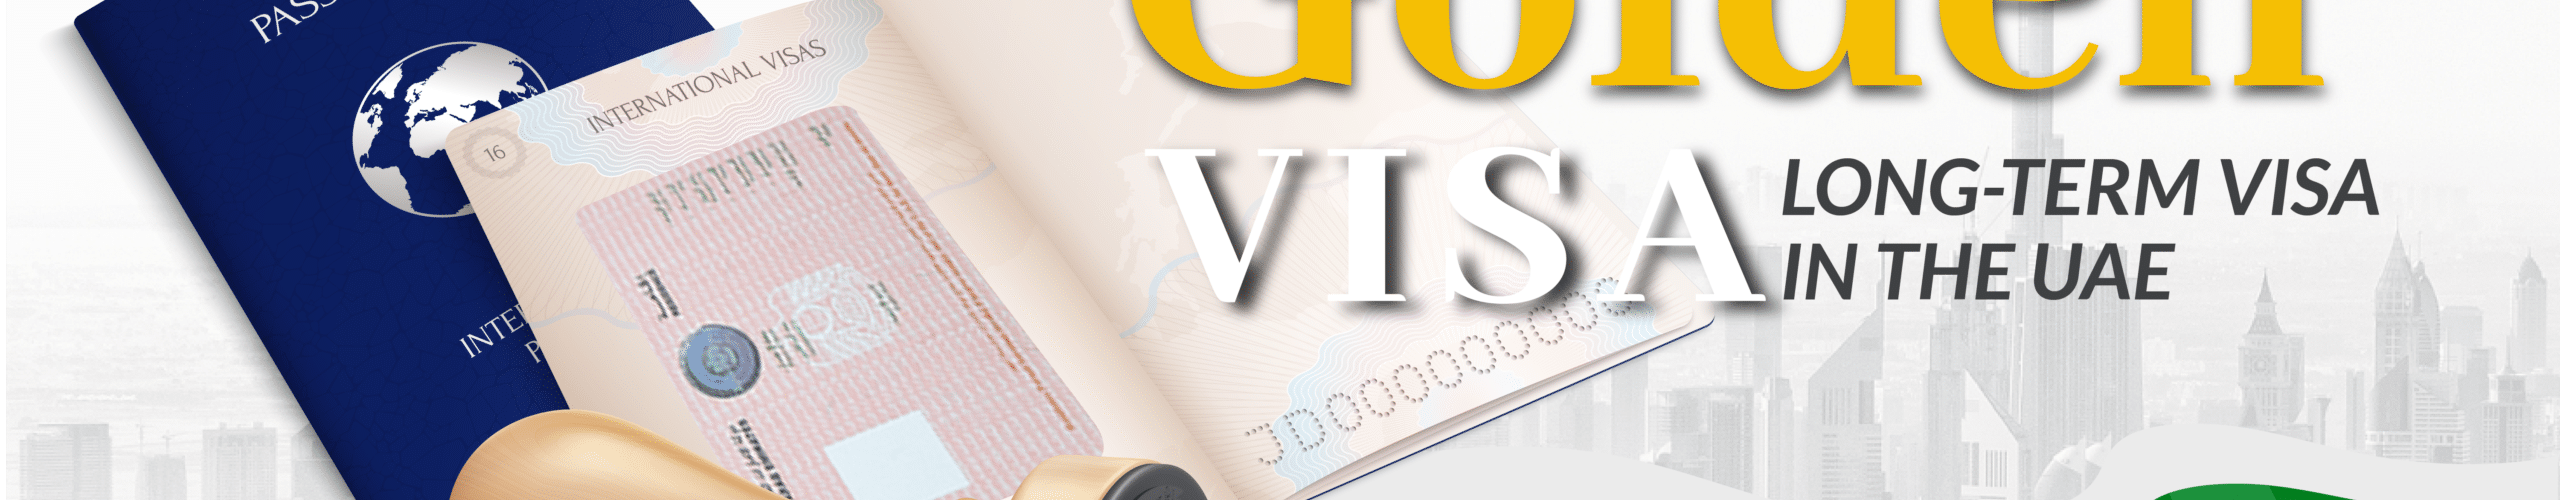 golden visa emirates id eligibility and cost